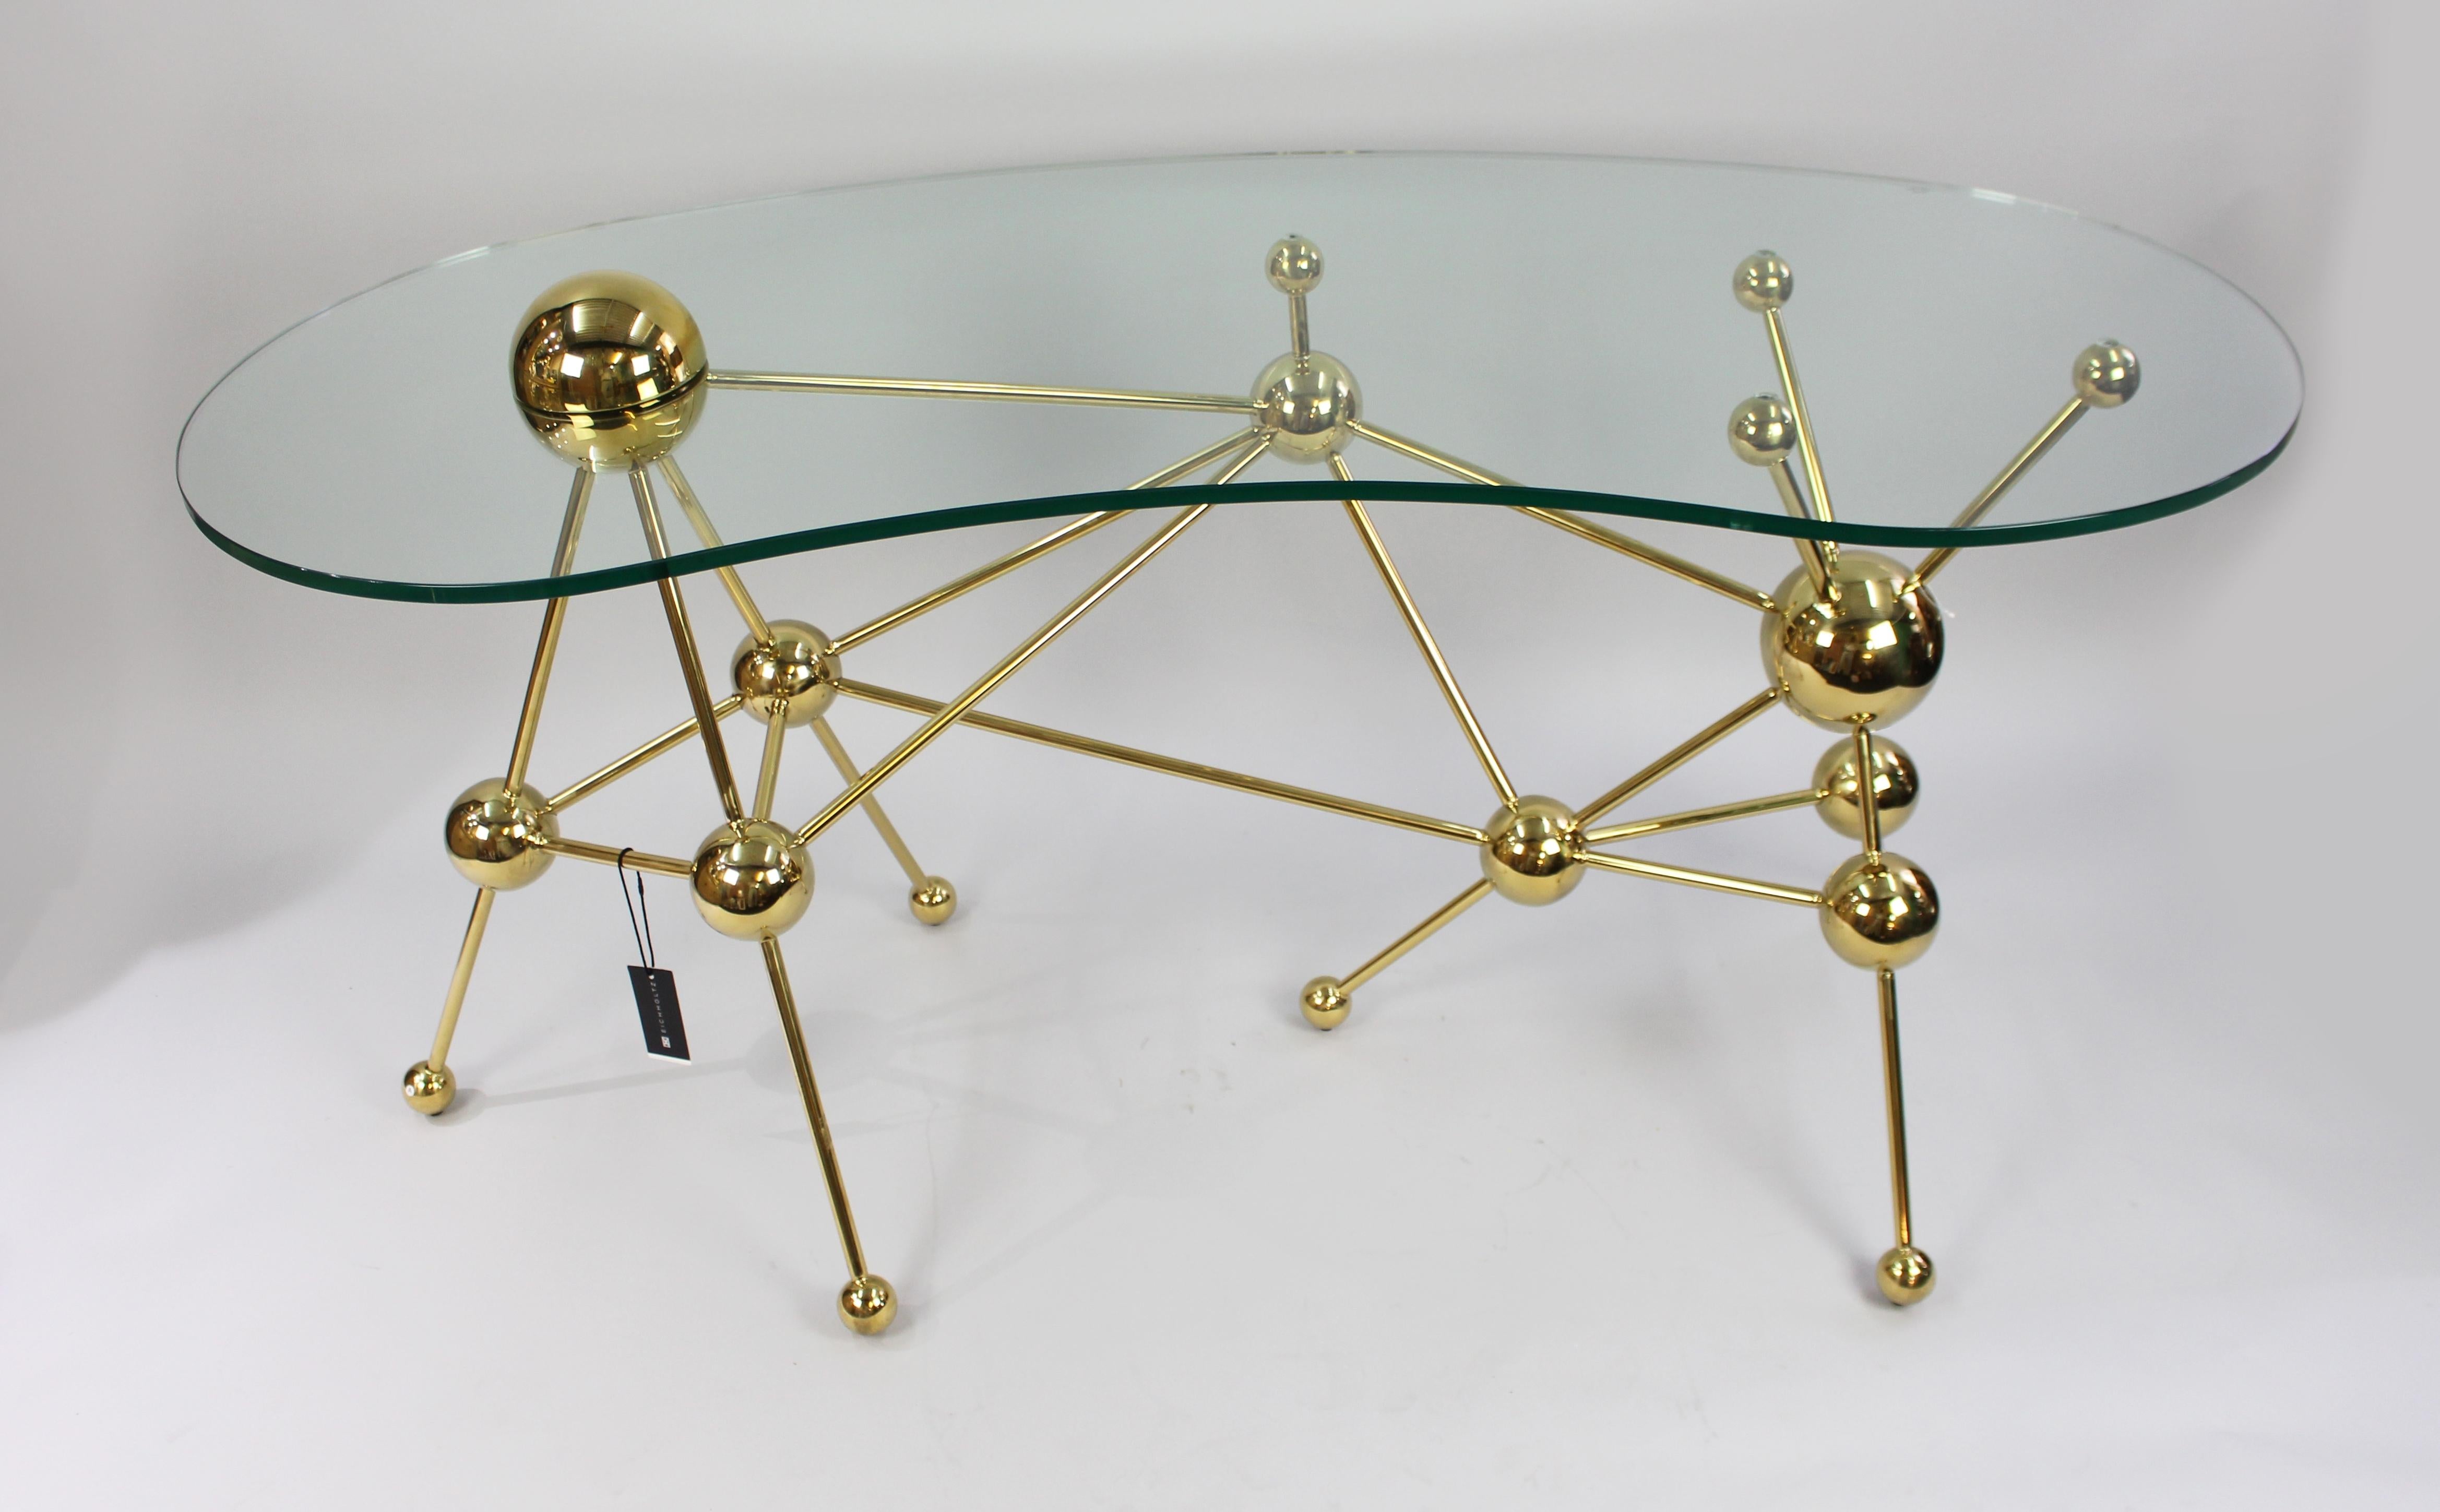 Maker 
Eichholtz

Composition 
Heavy glass top on gold metal Stand

Condition 
Purchased & never used
 

 

Stunning contemporary table by Eichholtz

Heavy kidney shaped tempered glass top.

Gold metal atomic design frame

RRP